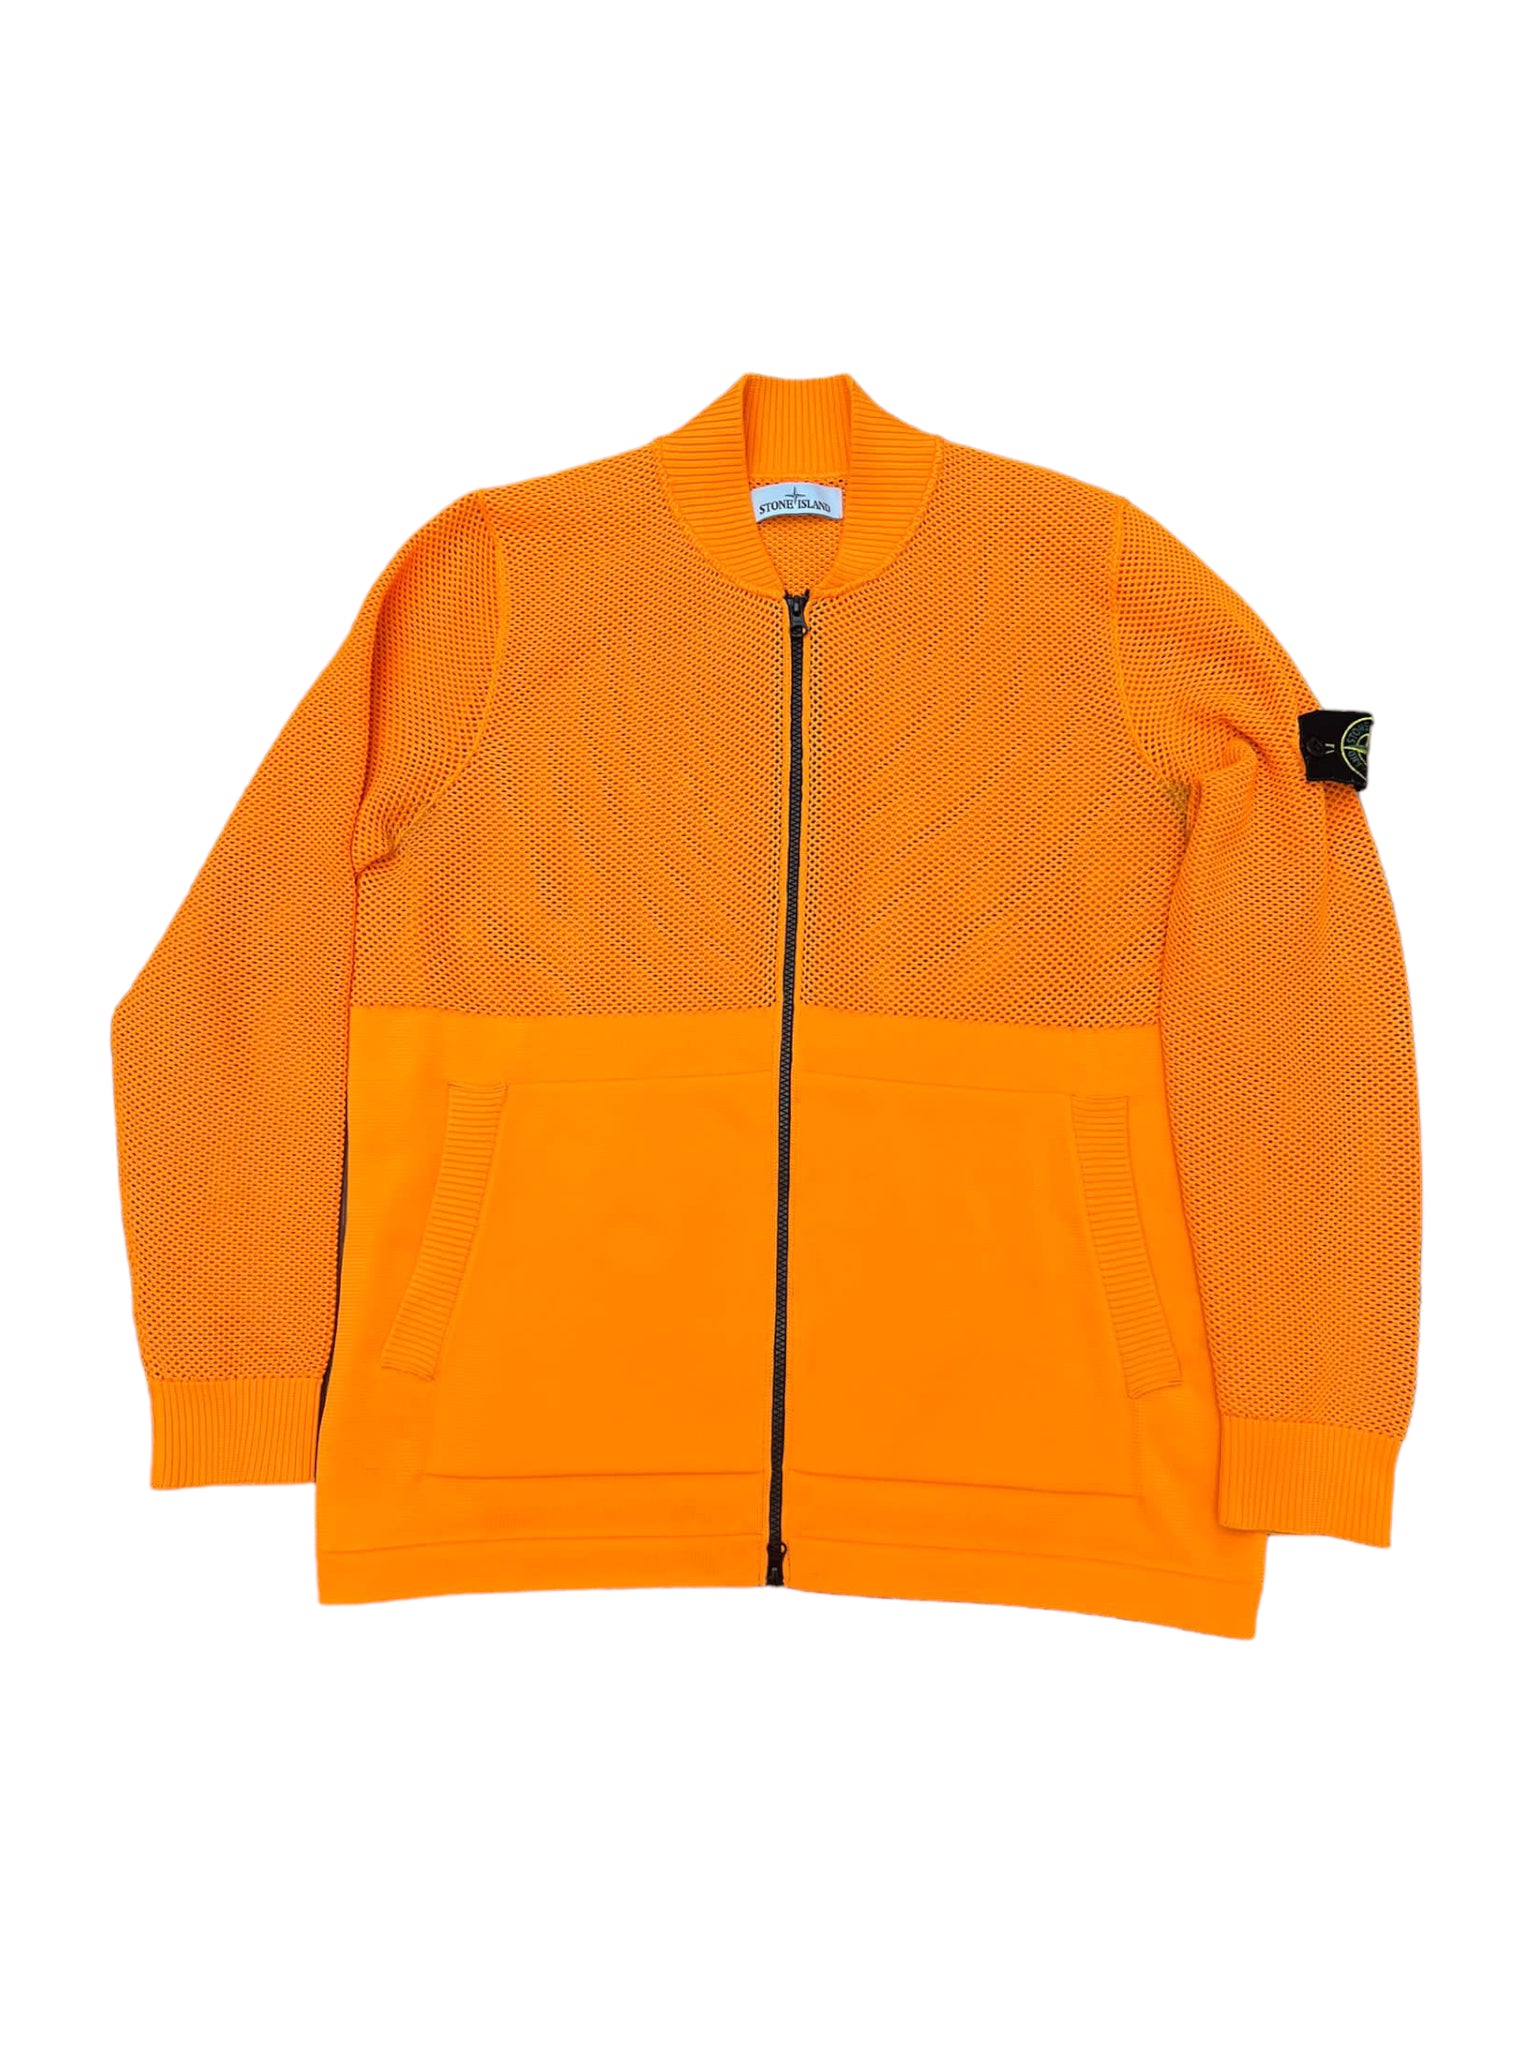 STONE ISLAND FLUO KNITTED ZIP UP XL – Archivio Clothing